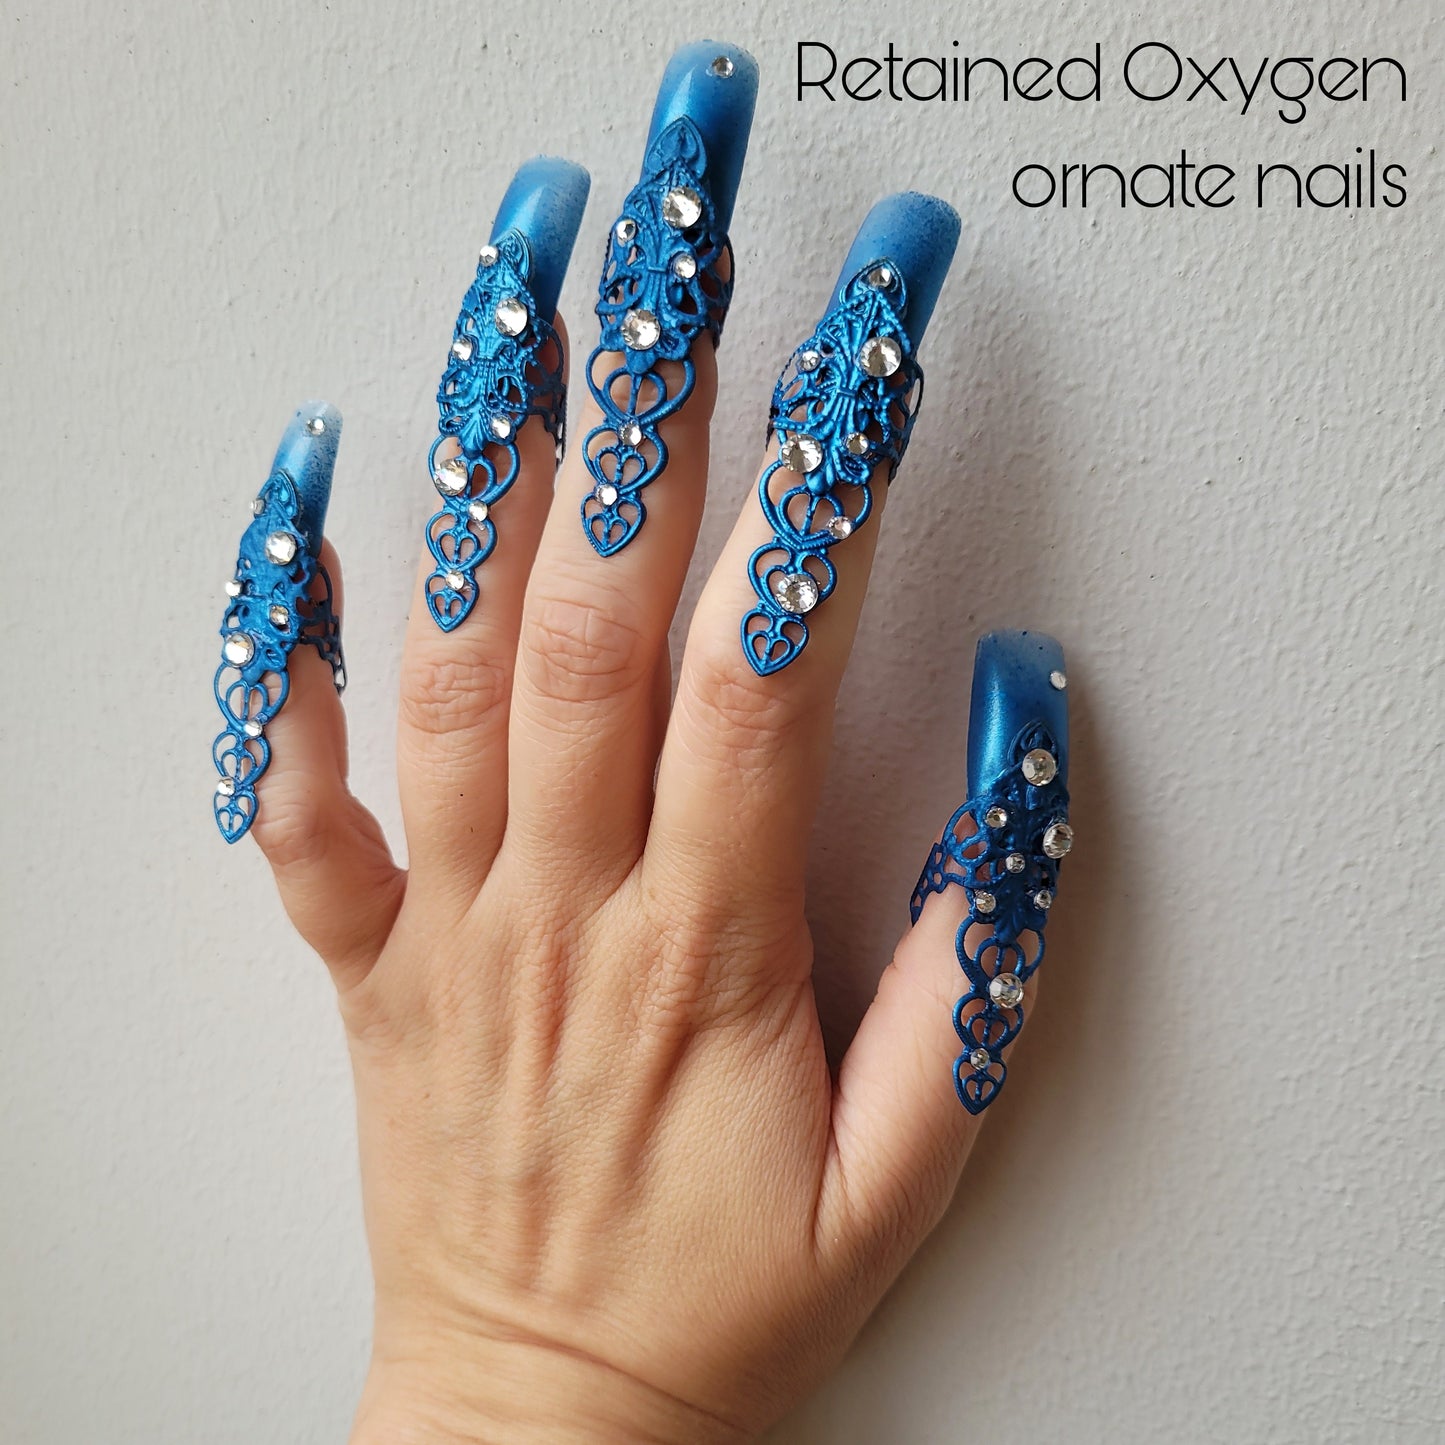 Made-to-order: the Retained Oxygen ornate nails